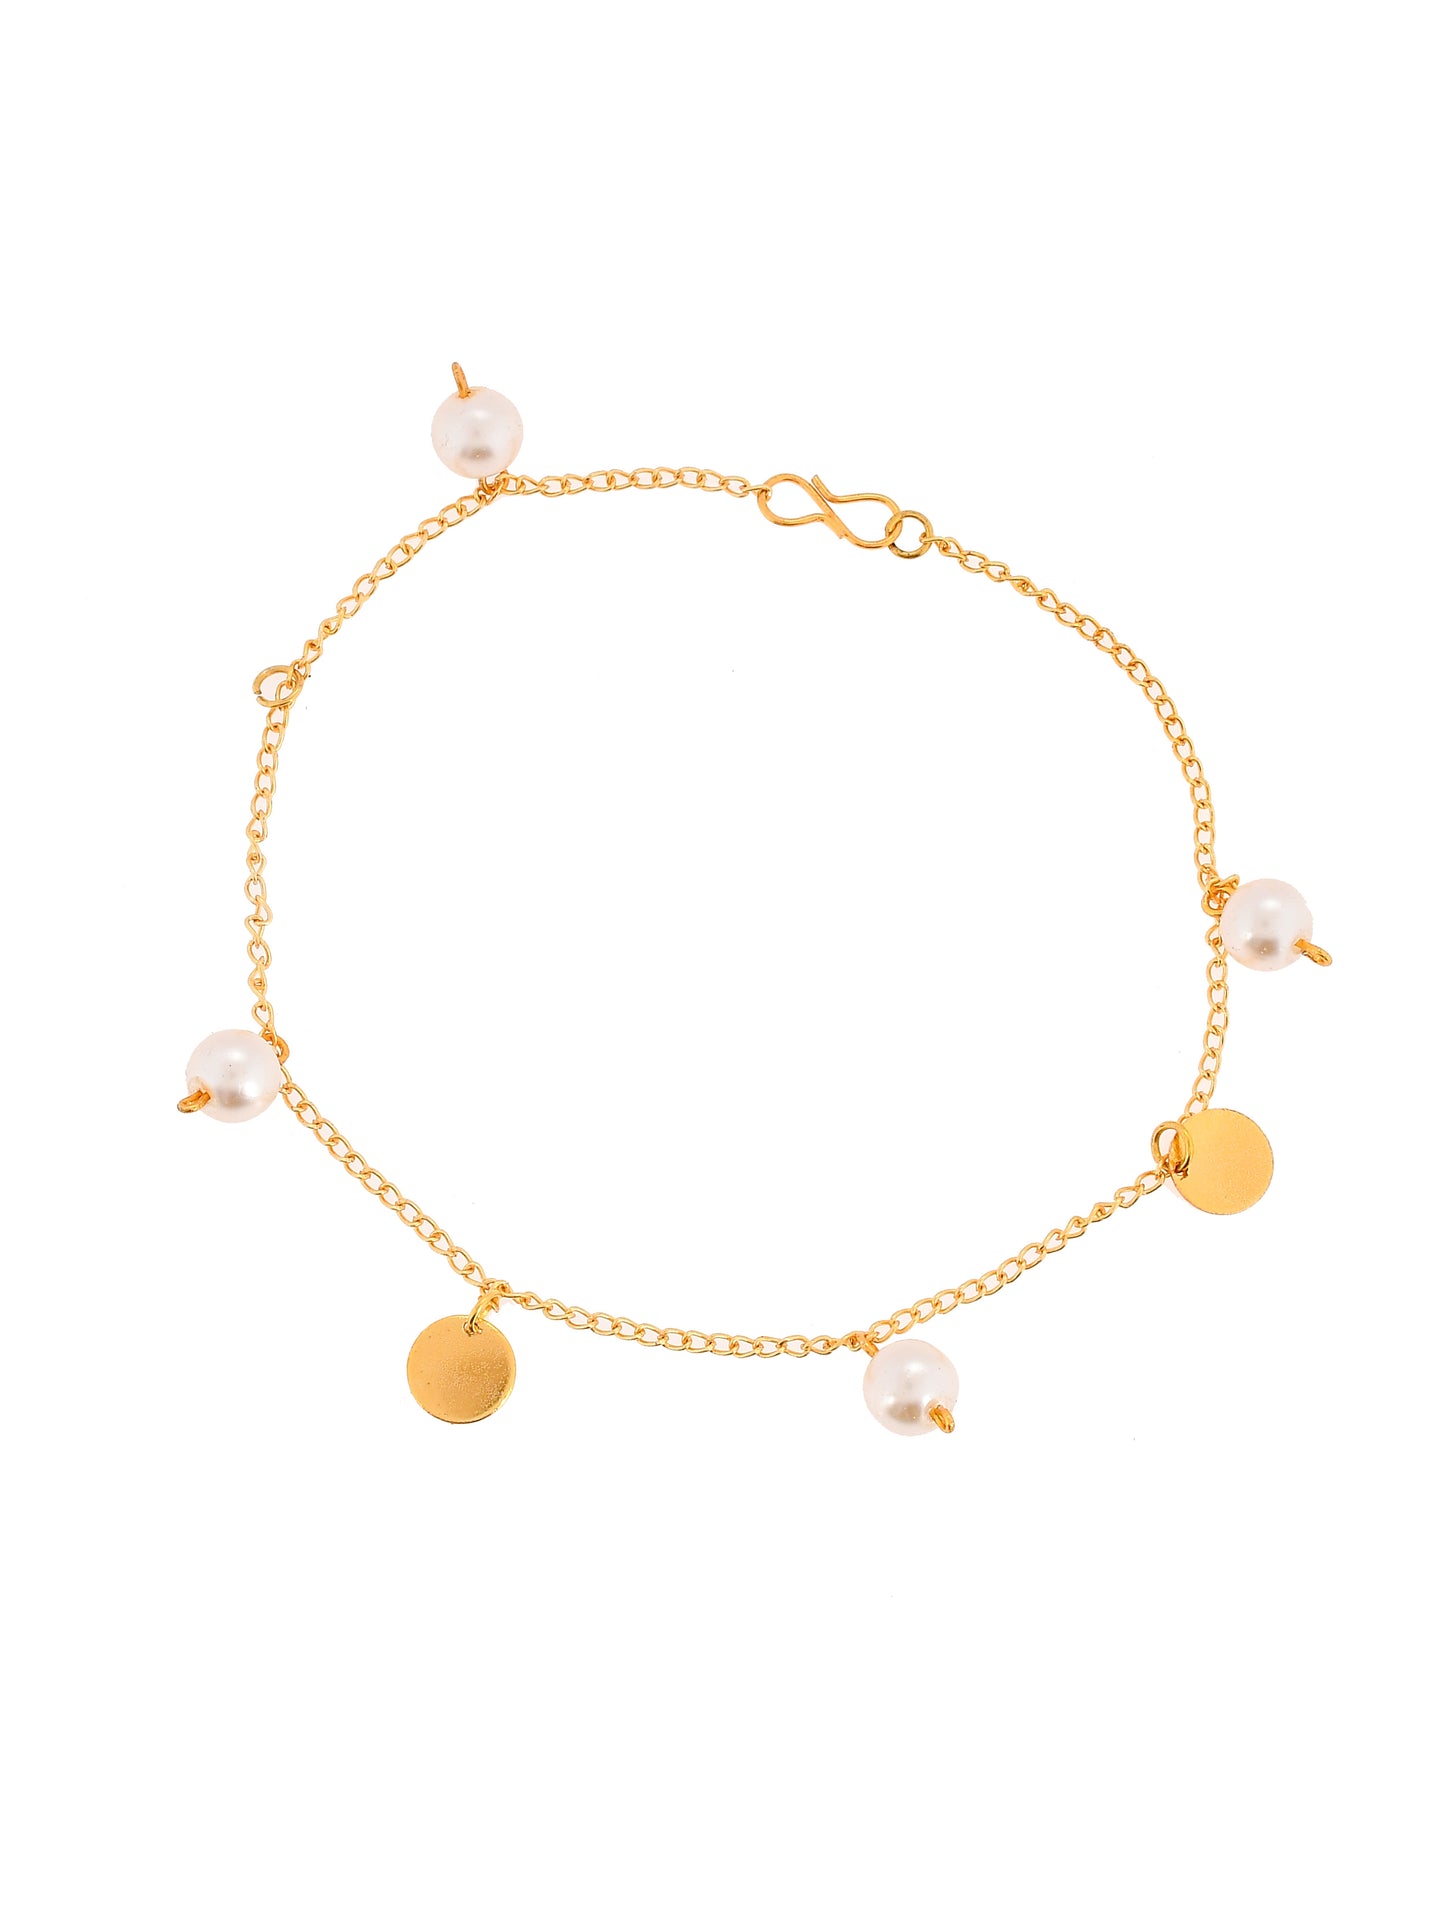 Gold Anklet with Dangling Pearls and Charms